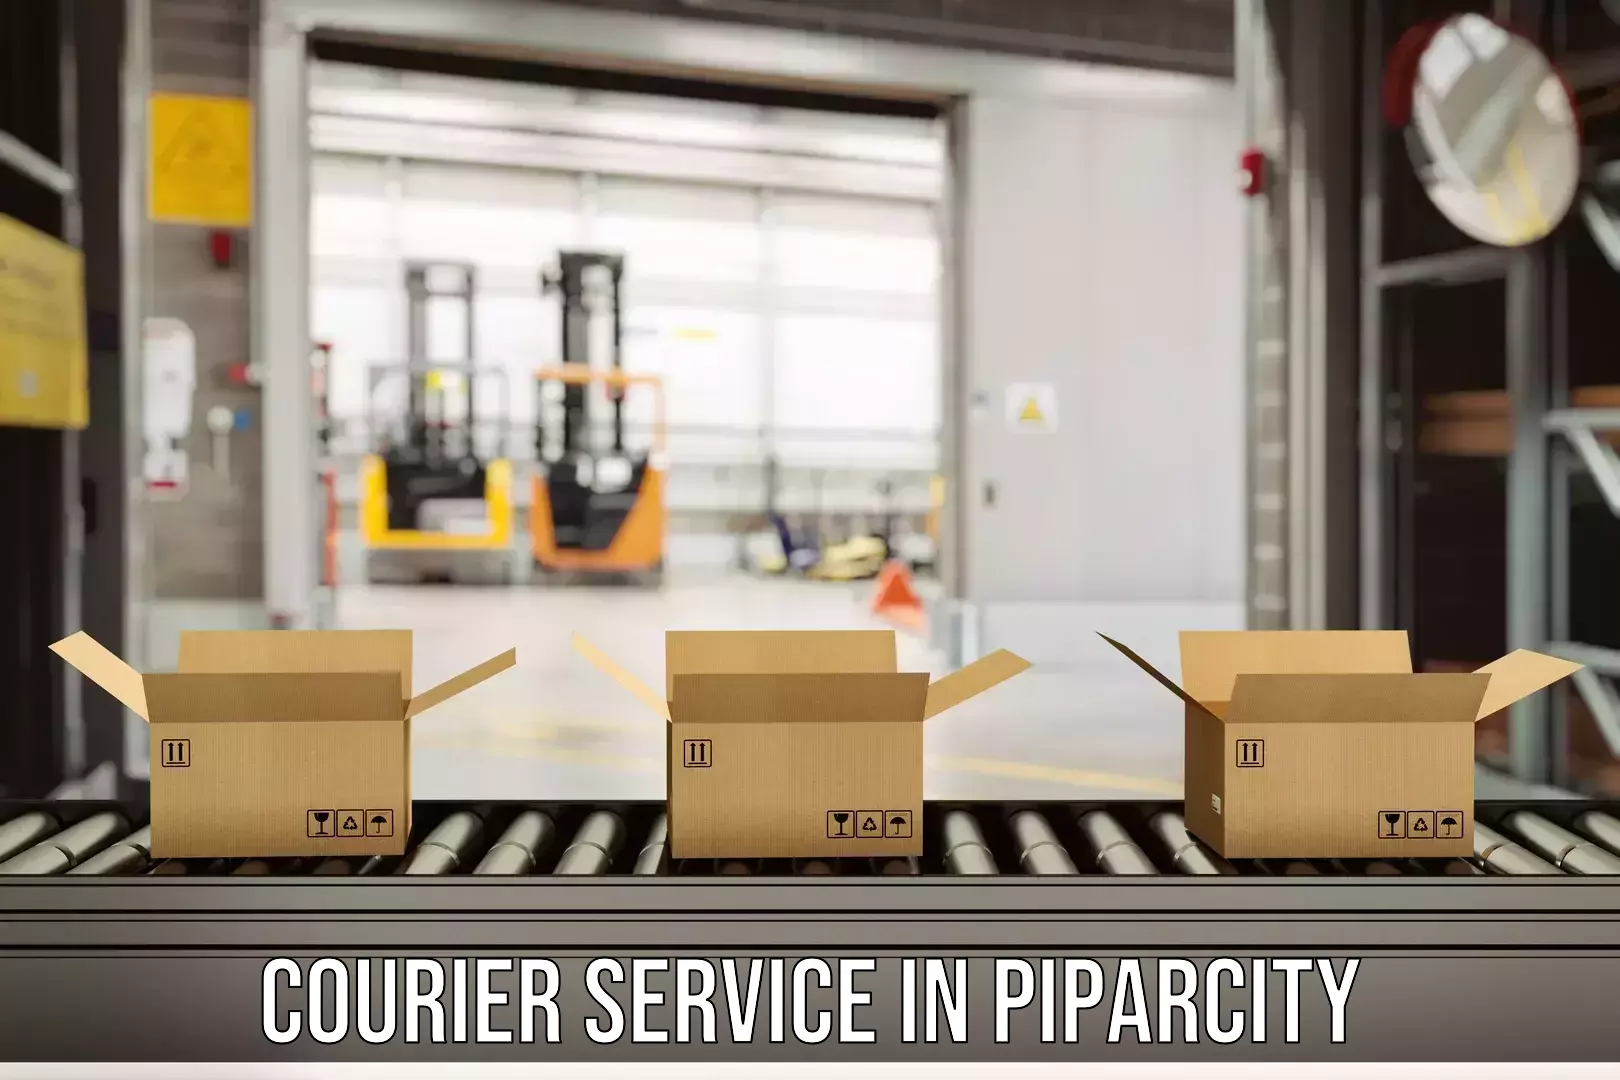 Comprehensive shipping strategies in Piparcity